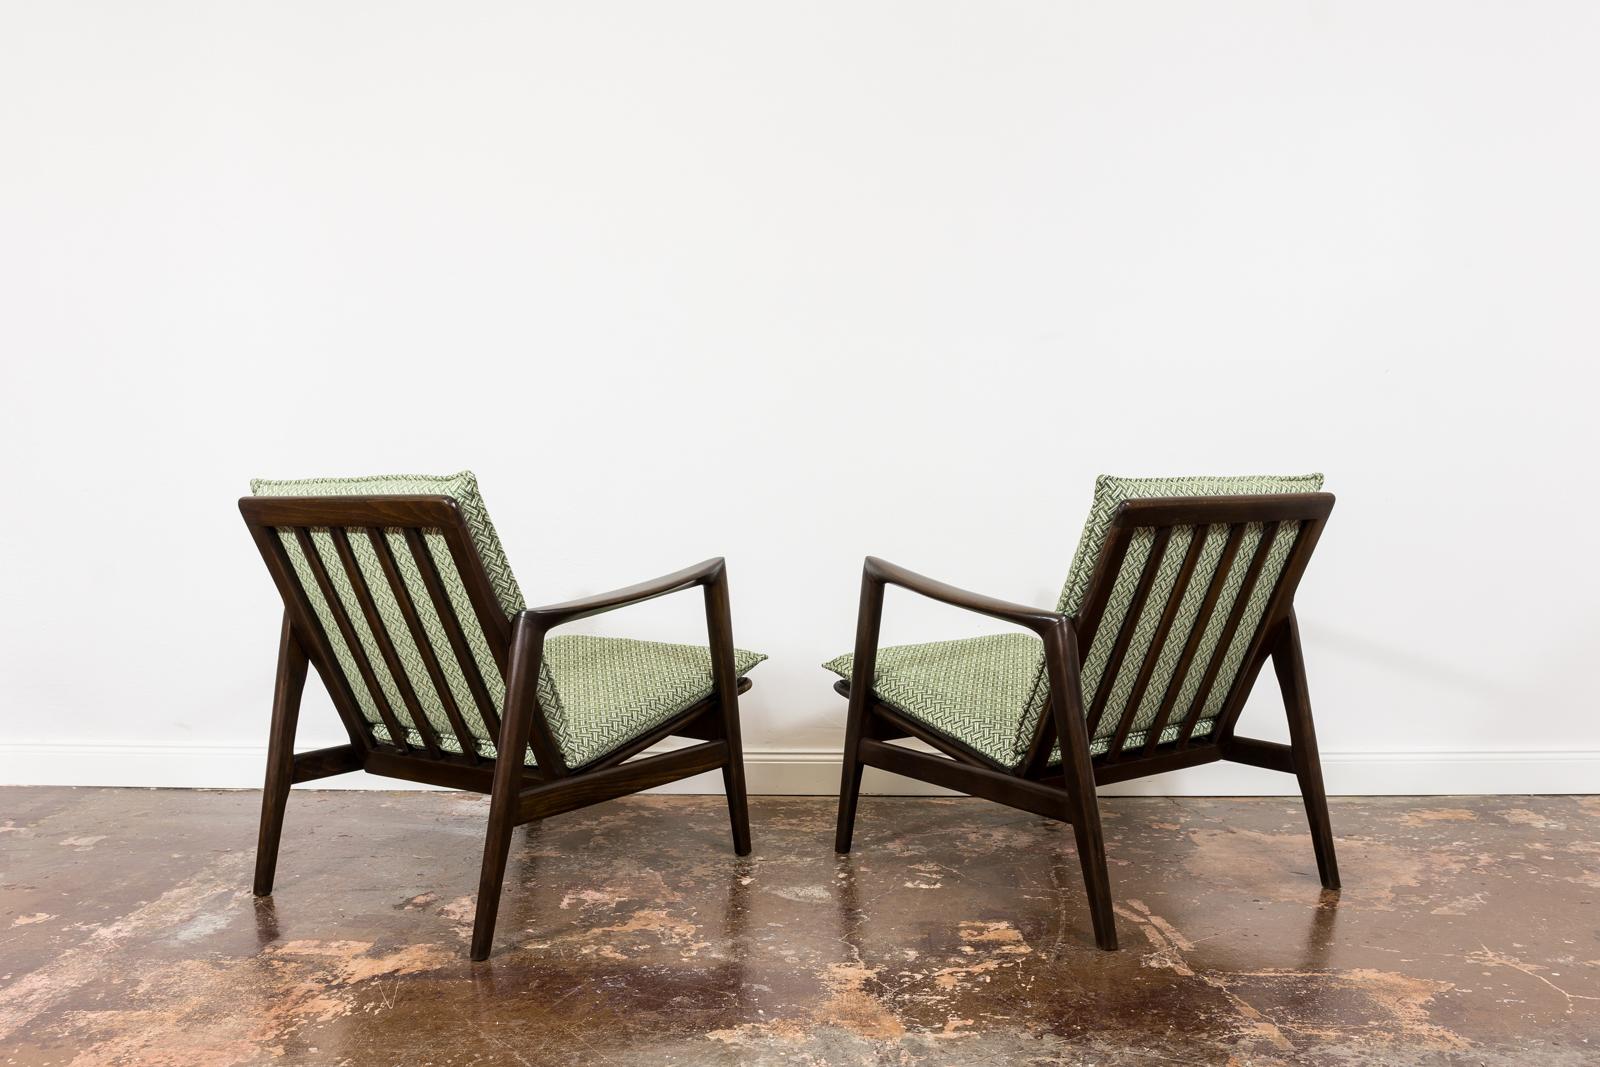 Pair of Mid Century Modern Armchairs Type 300-130, 1960s, Poland In Good Condition For Sale In Wroclaw, PL